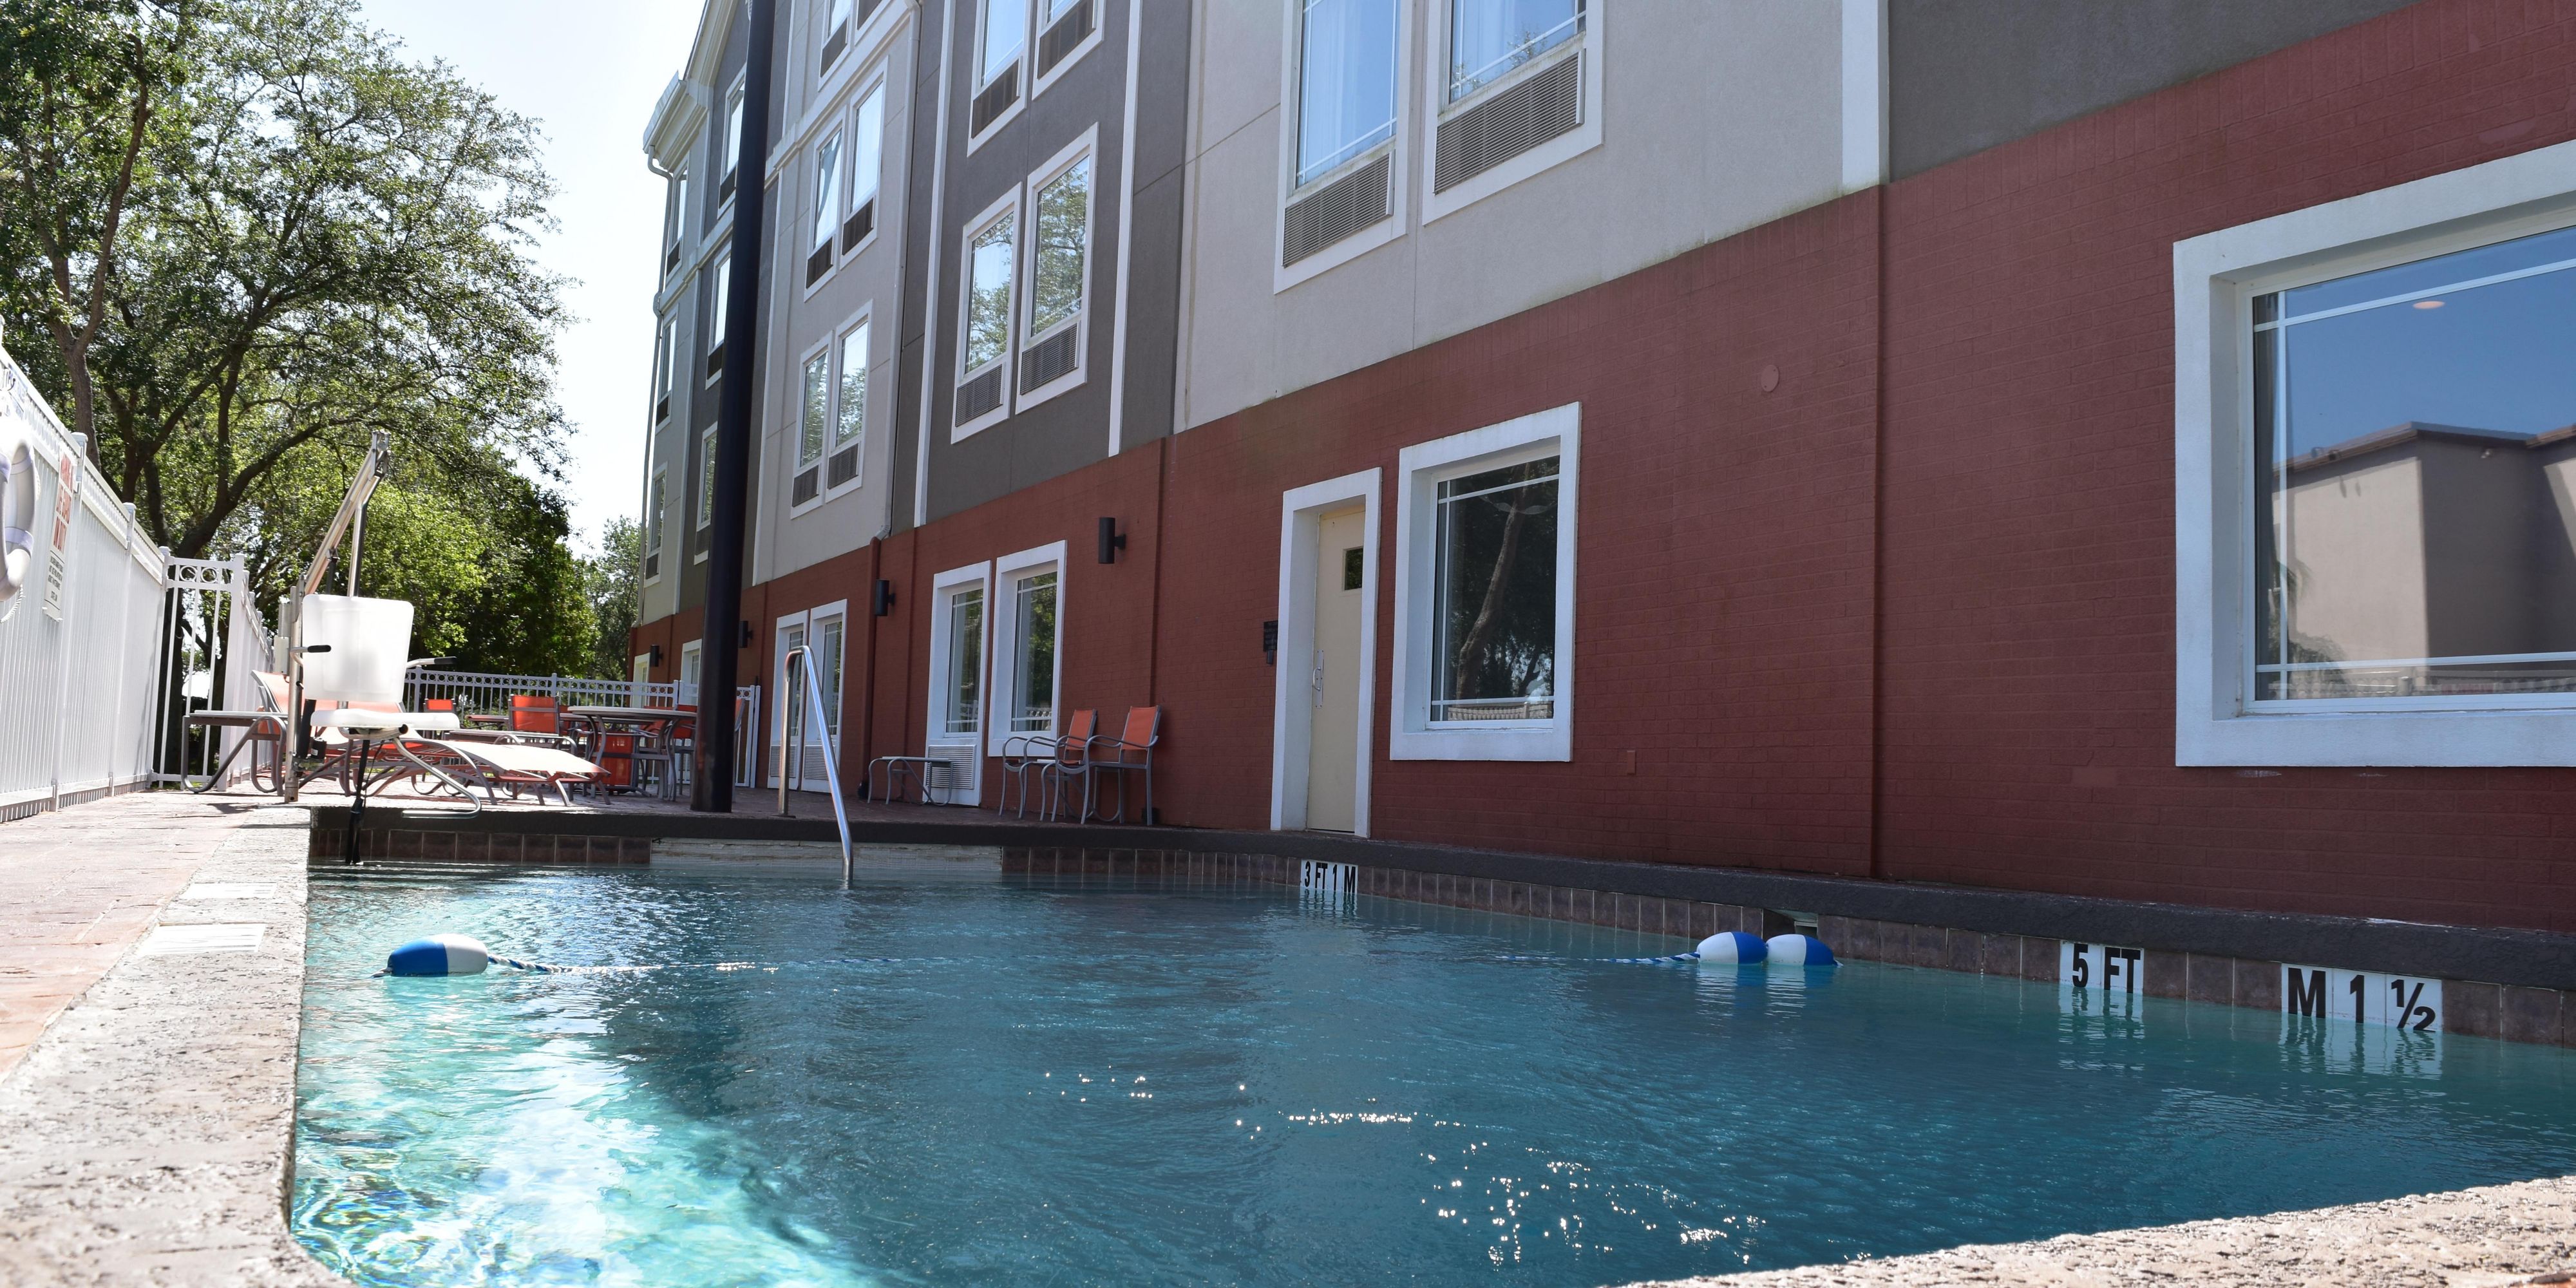 Cool down in our outdoor pool and enjoy a nice swim, read a book while sunbathing or just take an afternoon nap.  